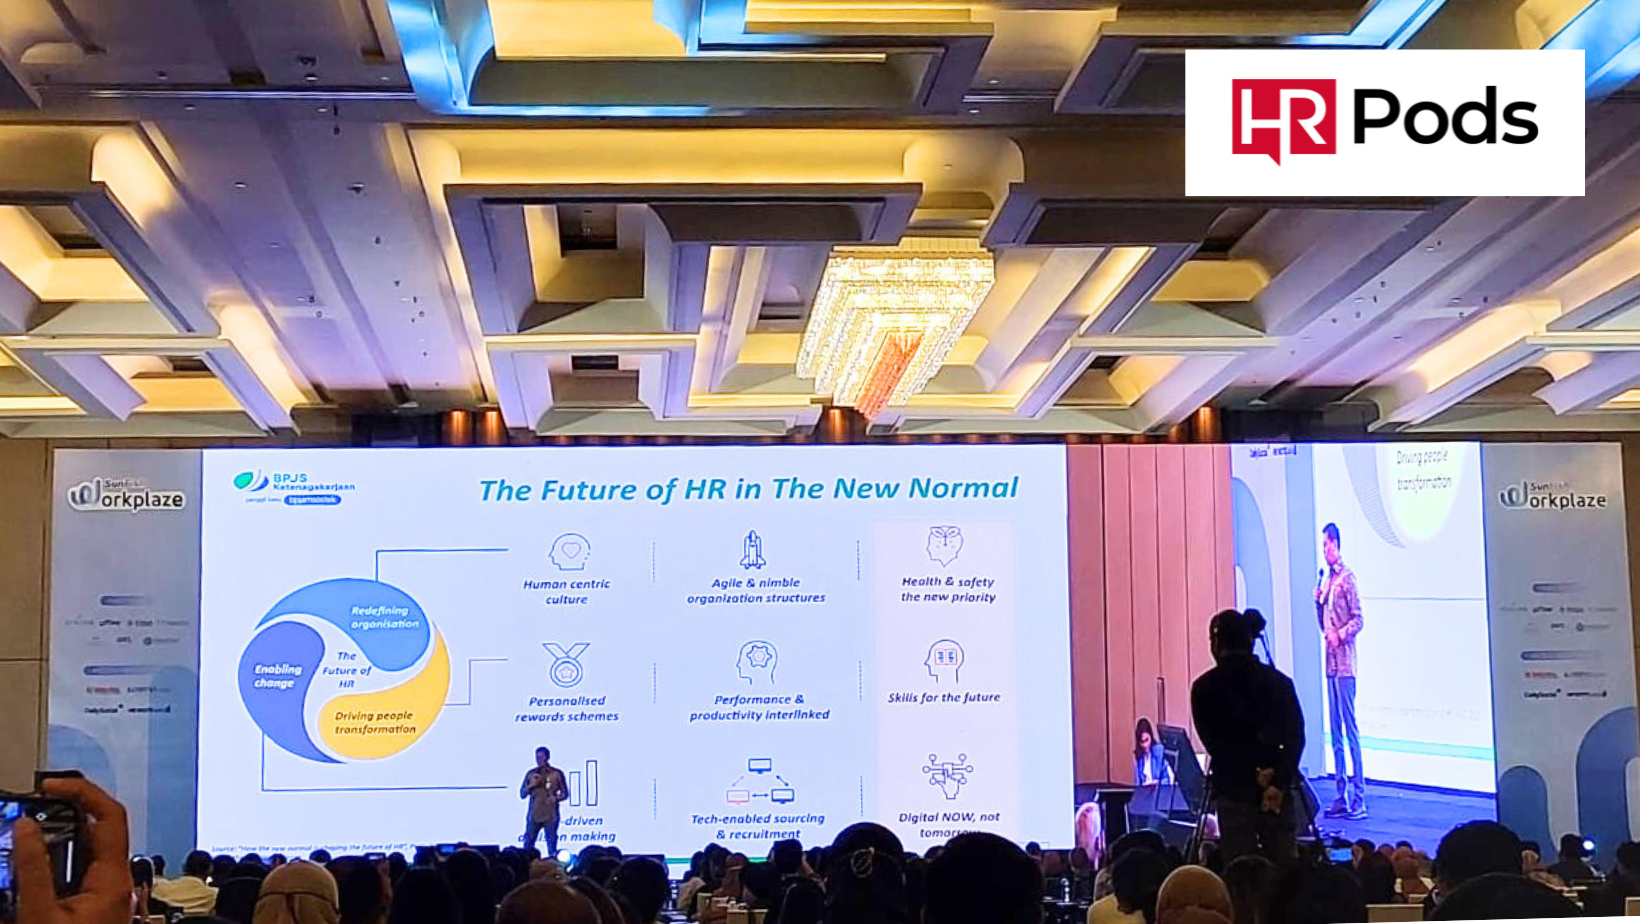 DataOn HR Conference 2022 01 HRPods